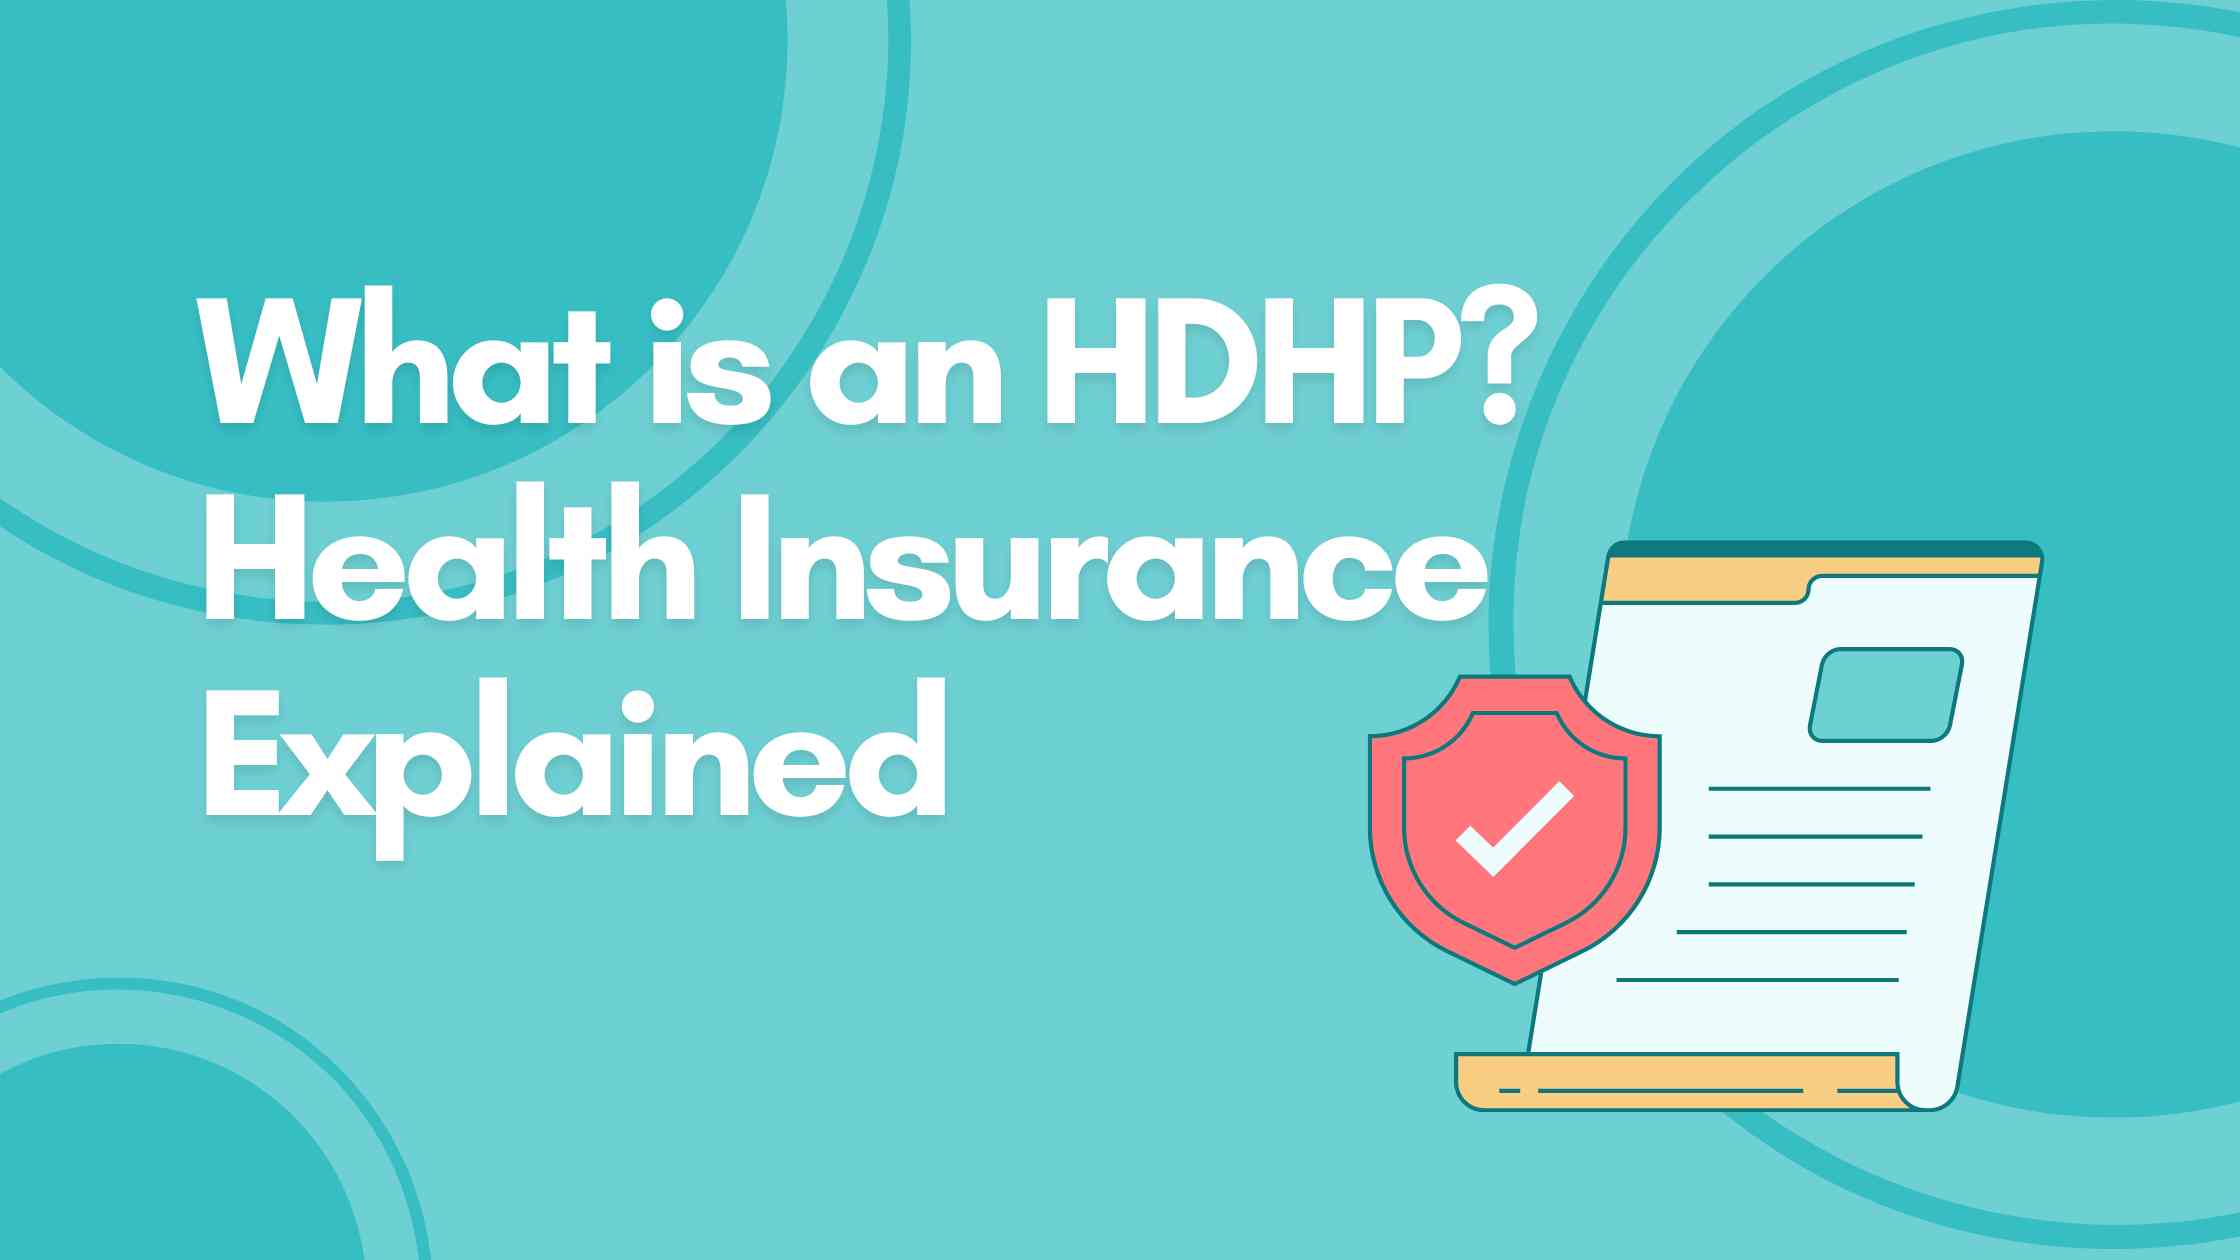 Graphic that says: "What is an HDHP? Health insurance explained"